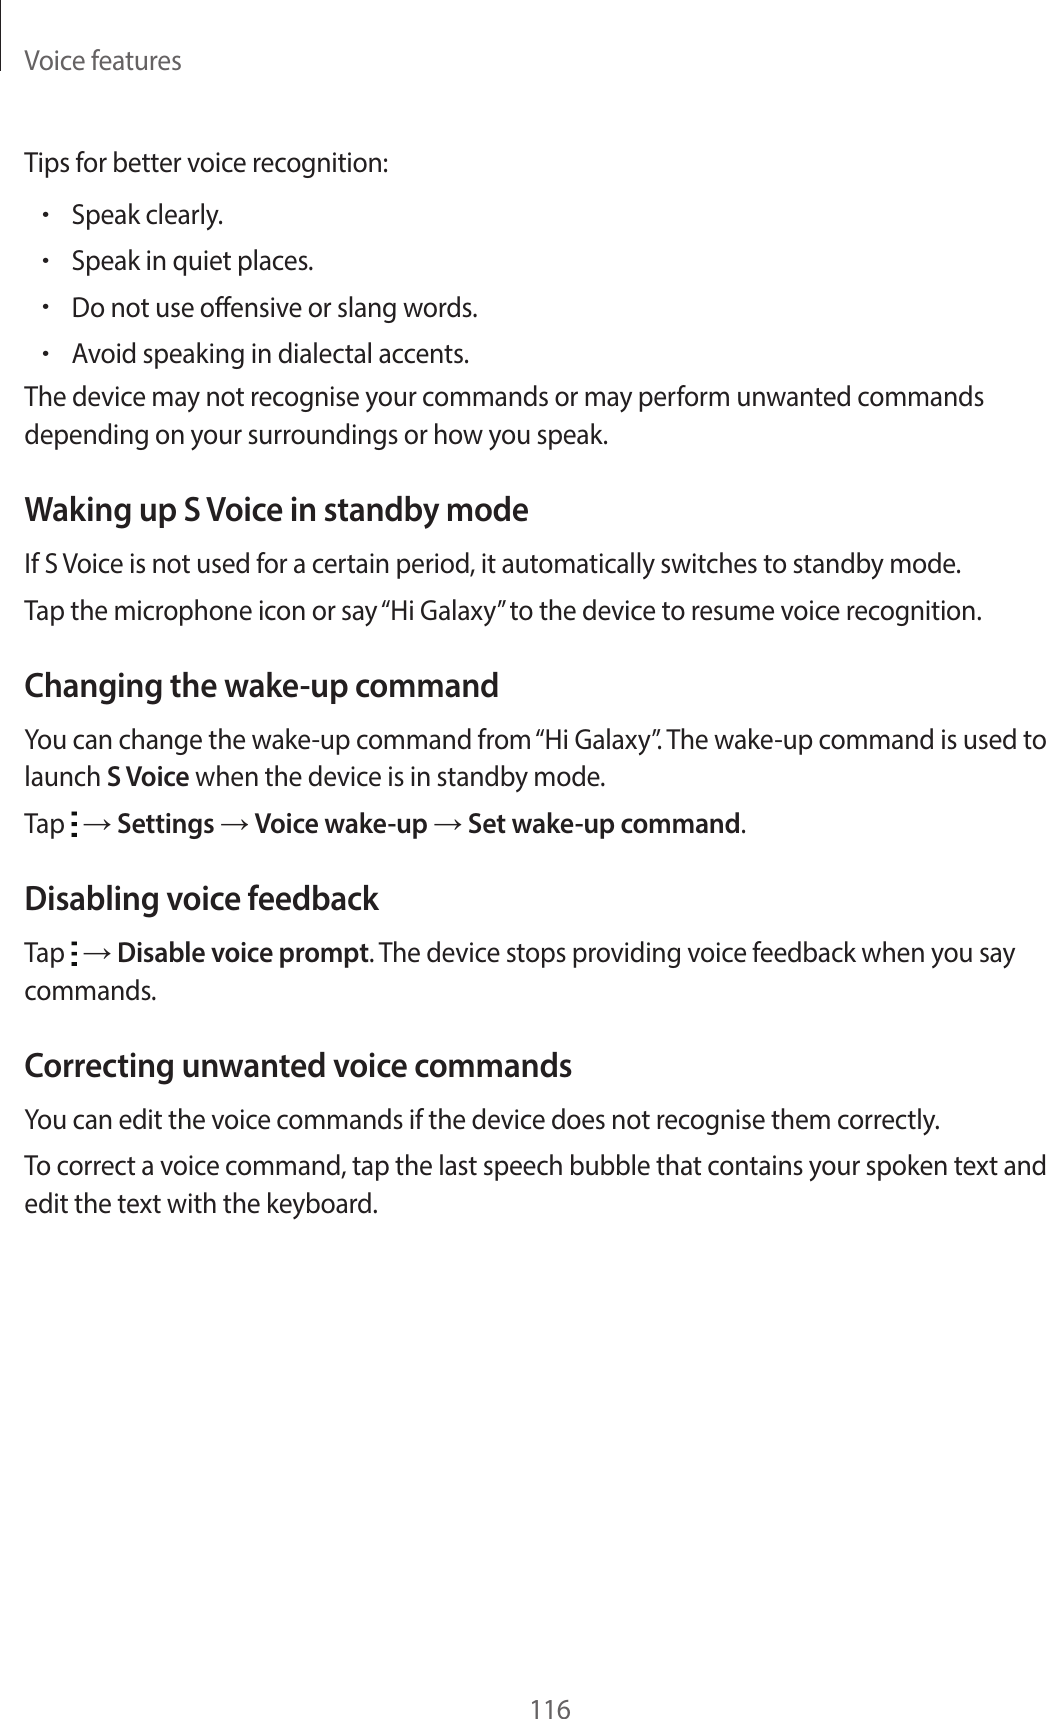 Voice features116Tips for better voice recognition:•Speak clearly.•Speak in quiet places.•Do not use offensive or slang words.•Avoid speaking in dialectal accents.The device may not recognise your commands or may perform unwanted commands depending on your surroundings or how you speak.Waking up S Voice in standby modeIf S Voice is not used for a certain period, it automatically switches to standby mode.Tap the microphone icon or say “Hi Galaxy” to the device to resume voice recognition.Changing the wake-up commandYou can change the wake-up command from “Hi Galaxy”. The wake-up command is used to launch S Voice when the device is in standby mode.Tap   → Settings → Voice wake-up → Set wake-up command.Disabling voice feedbackTap   → Disable voice prompt. The device stops providing voice feedback when you say commands.Correcting unwanted voice commandsYou can edit the voice commands if the device does not recognise them correctly.To correct a voice command, tap the last speech bubble that contains your spoken text and edit the text with the keyboard.